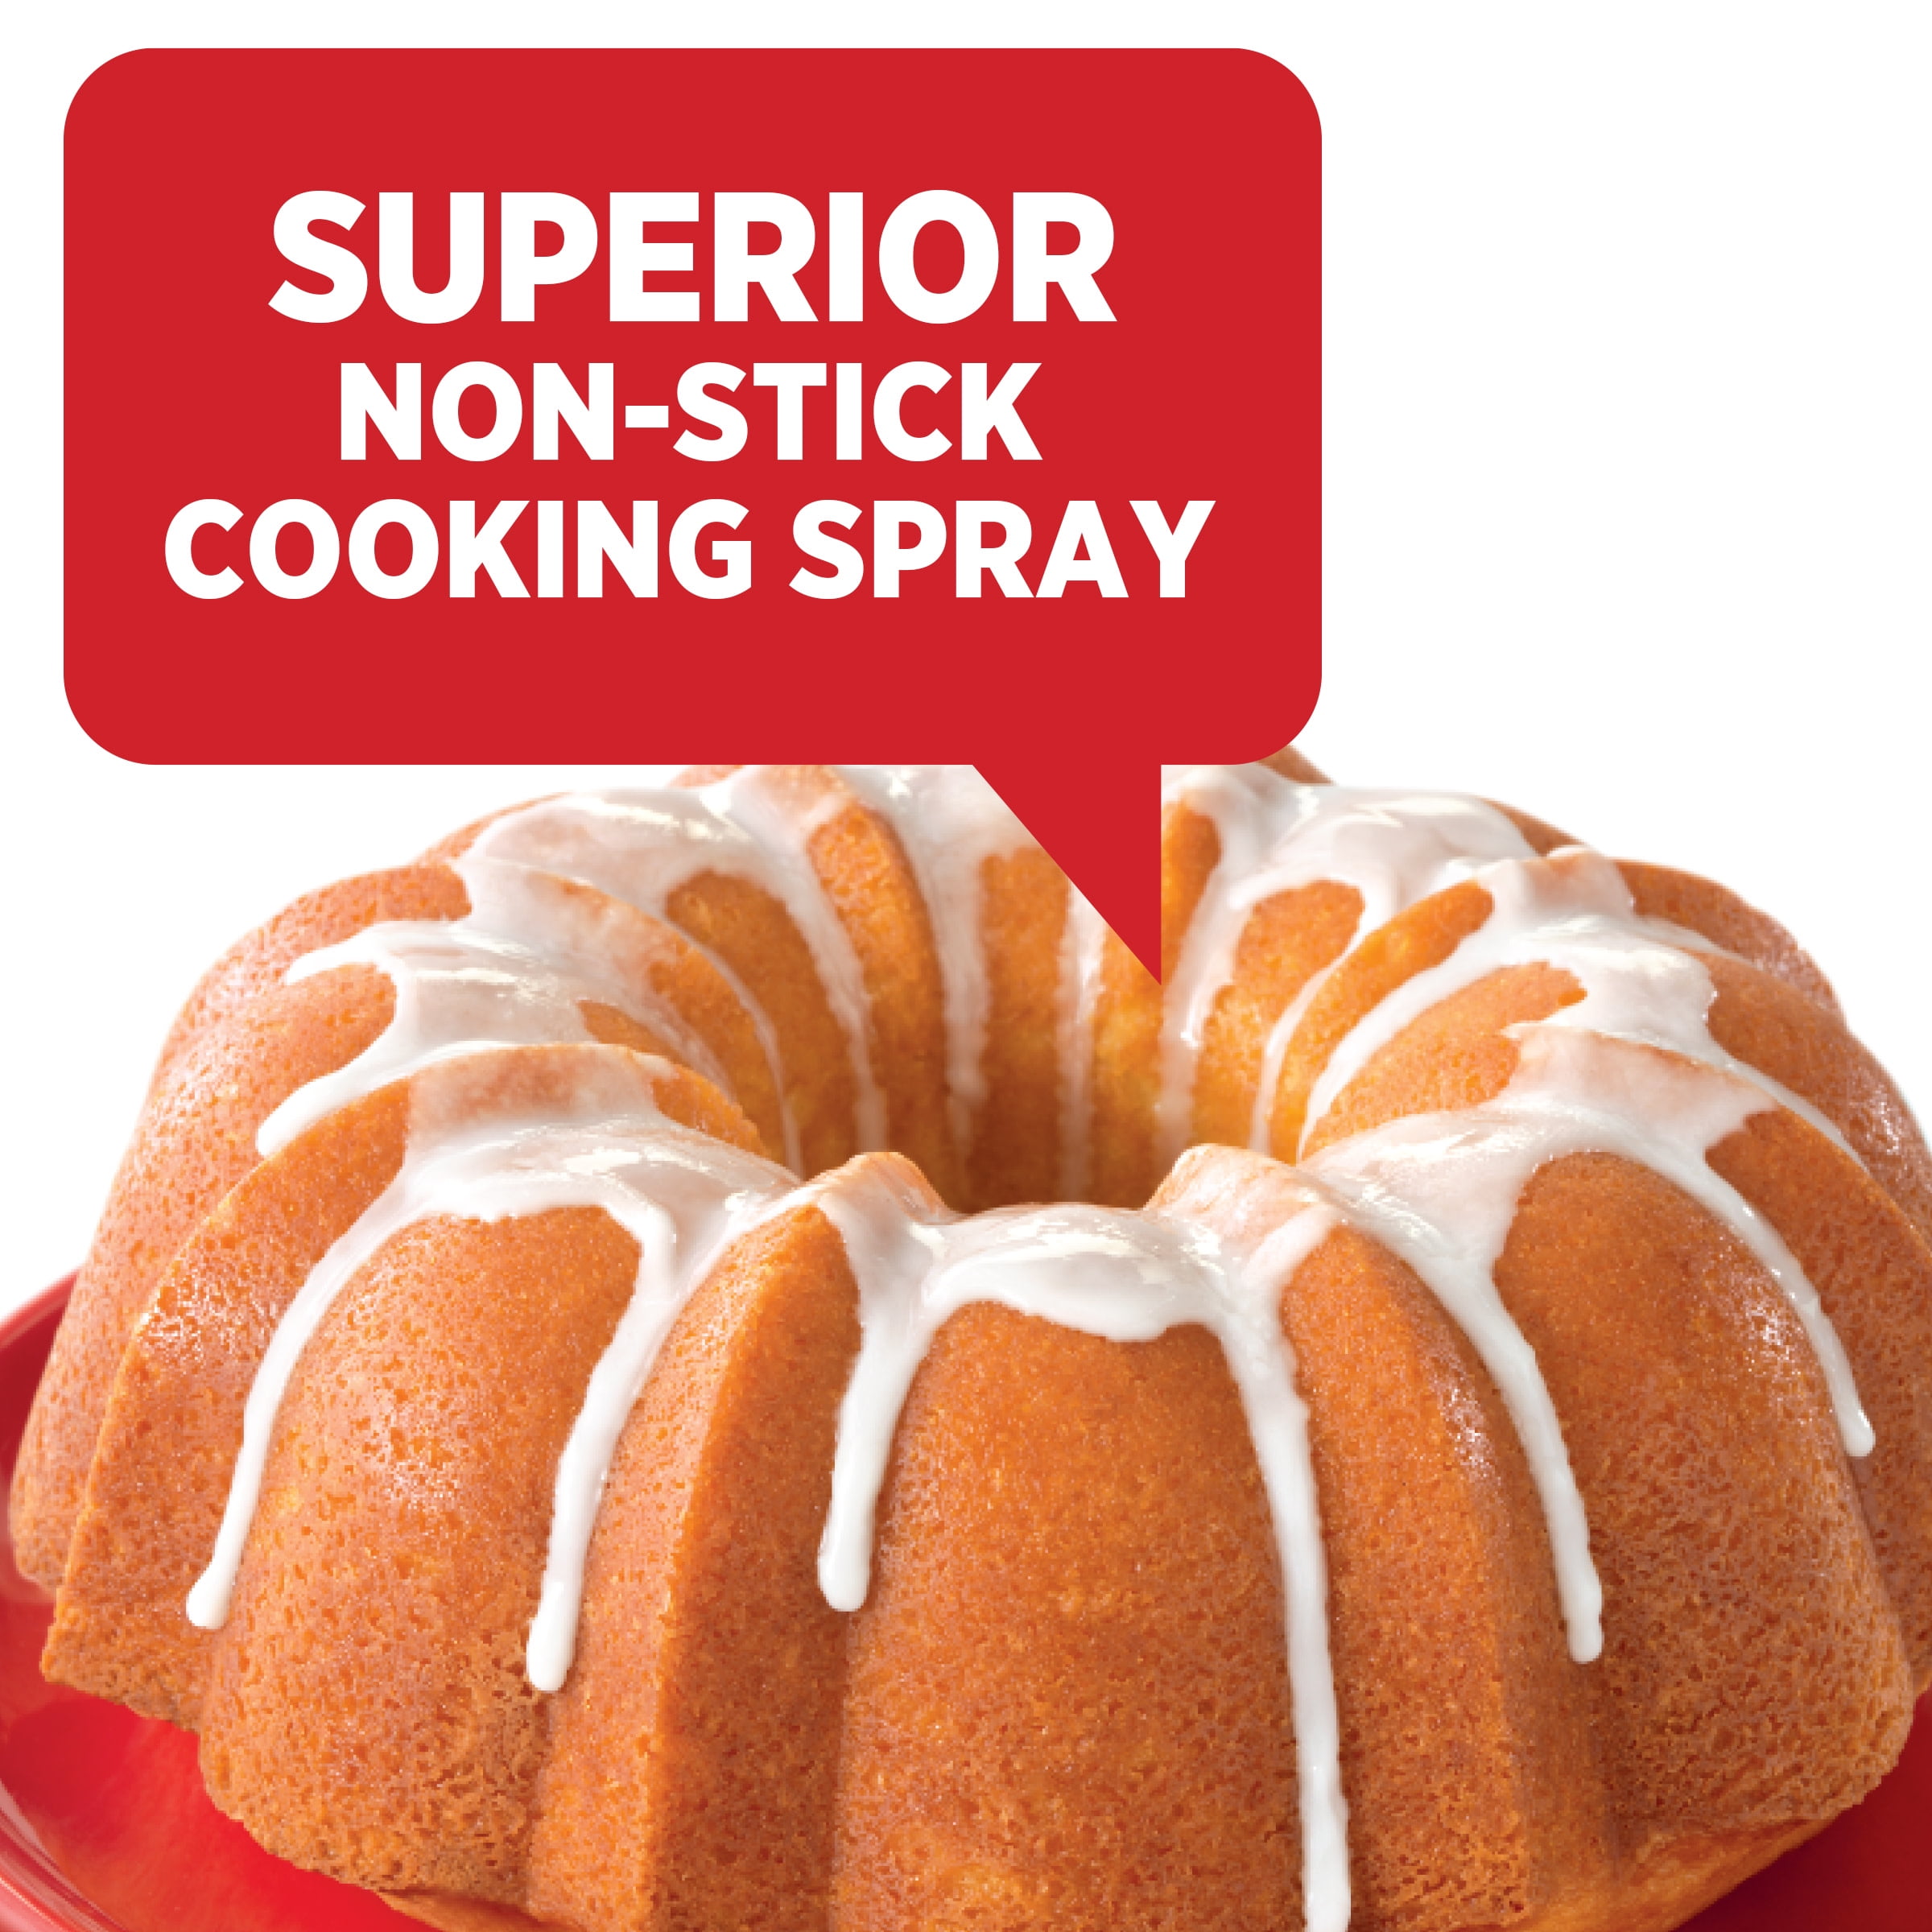 Cake stuck to bundt pan. I used a LOT of non-stick spray in non